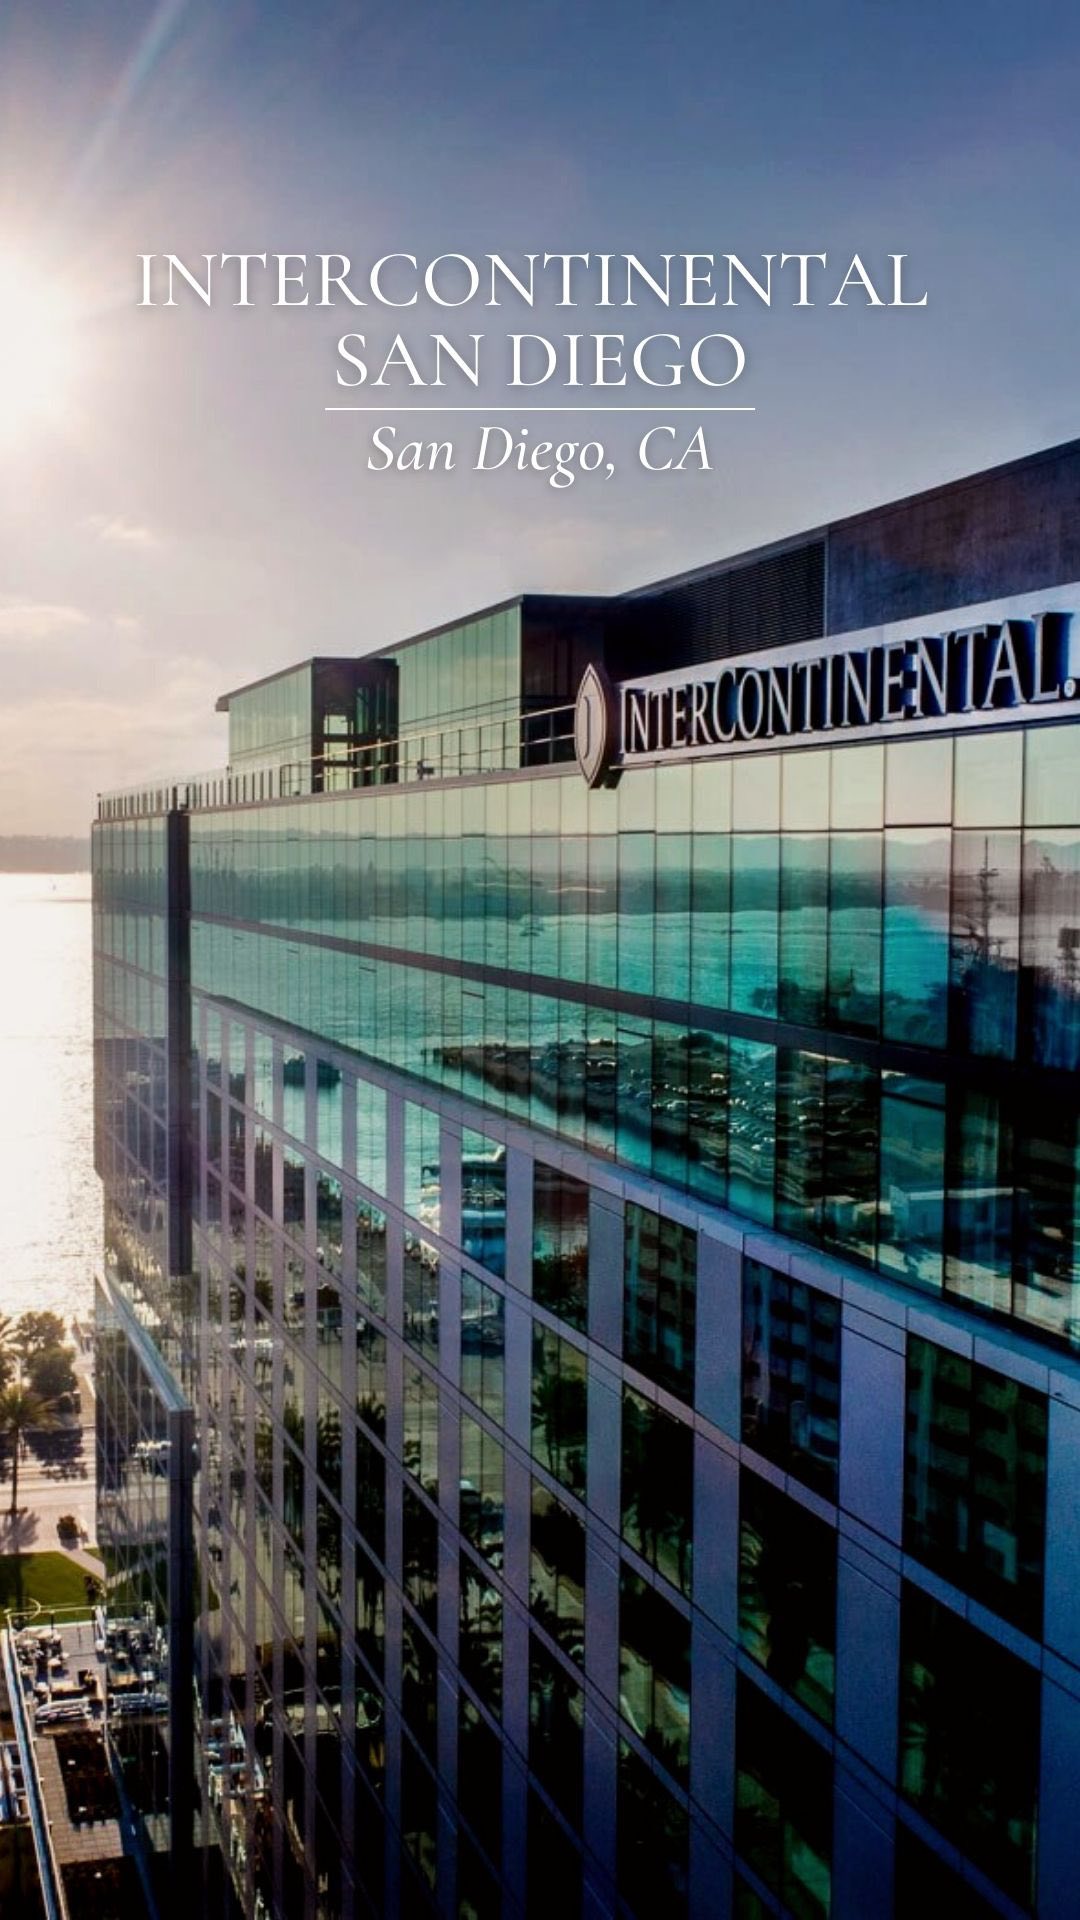 @intercontinentalsd is situated right on the Bayfront in downtown San Diego with stunning sunset views. The club rooms include daily lounge access for two people with top notch concierge service, complimentary breakfast, snacks, coffee, wine and beer, plus top floor accommodations with expansive bay view.